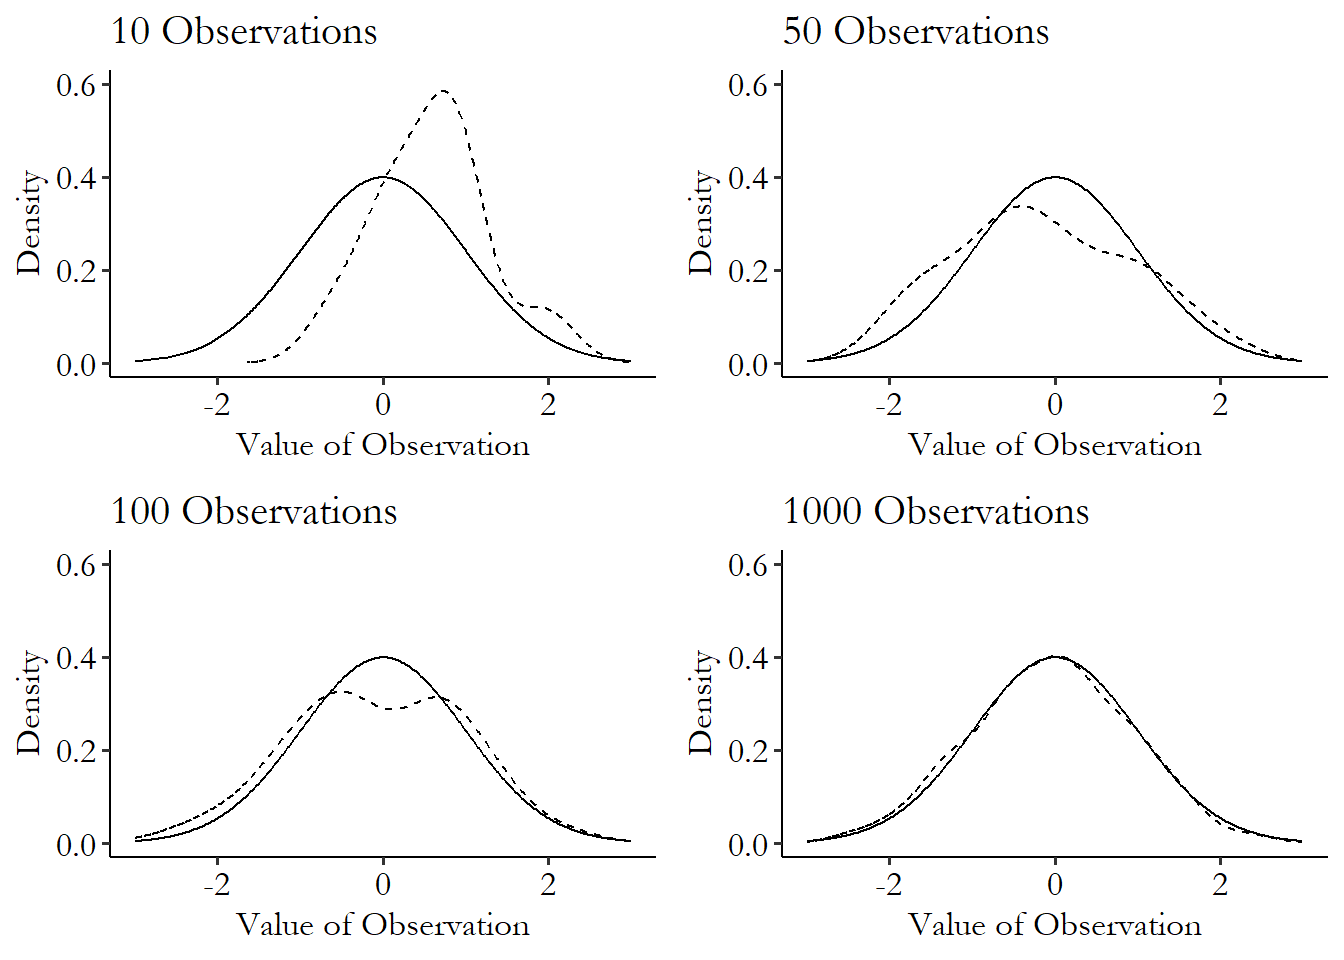 Four density plots showing the theoretical distribution of a mean, and the sampling distribution of that mean with increasingly larger sample sizes, where the theoretical and sampling distributions match more closely for larger samples